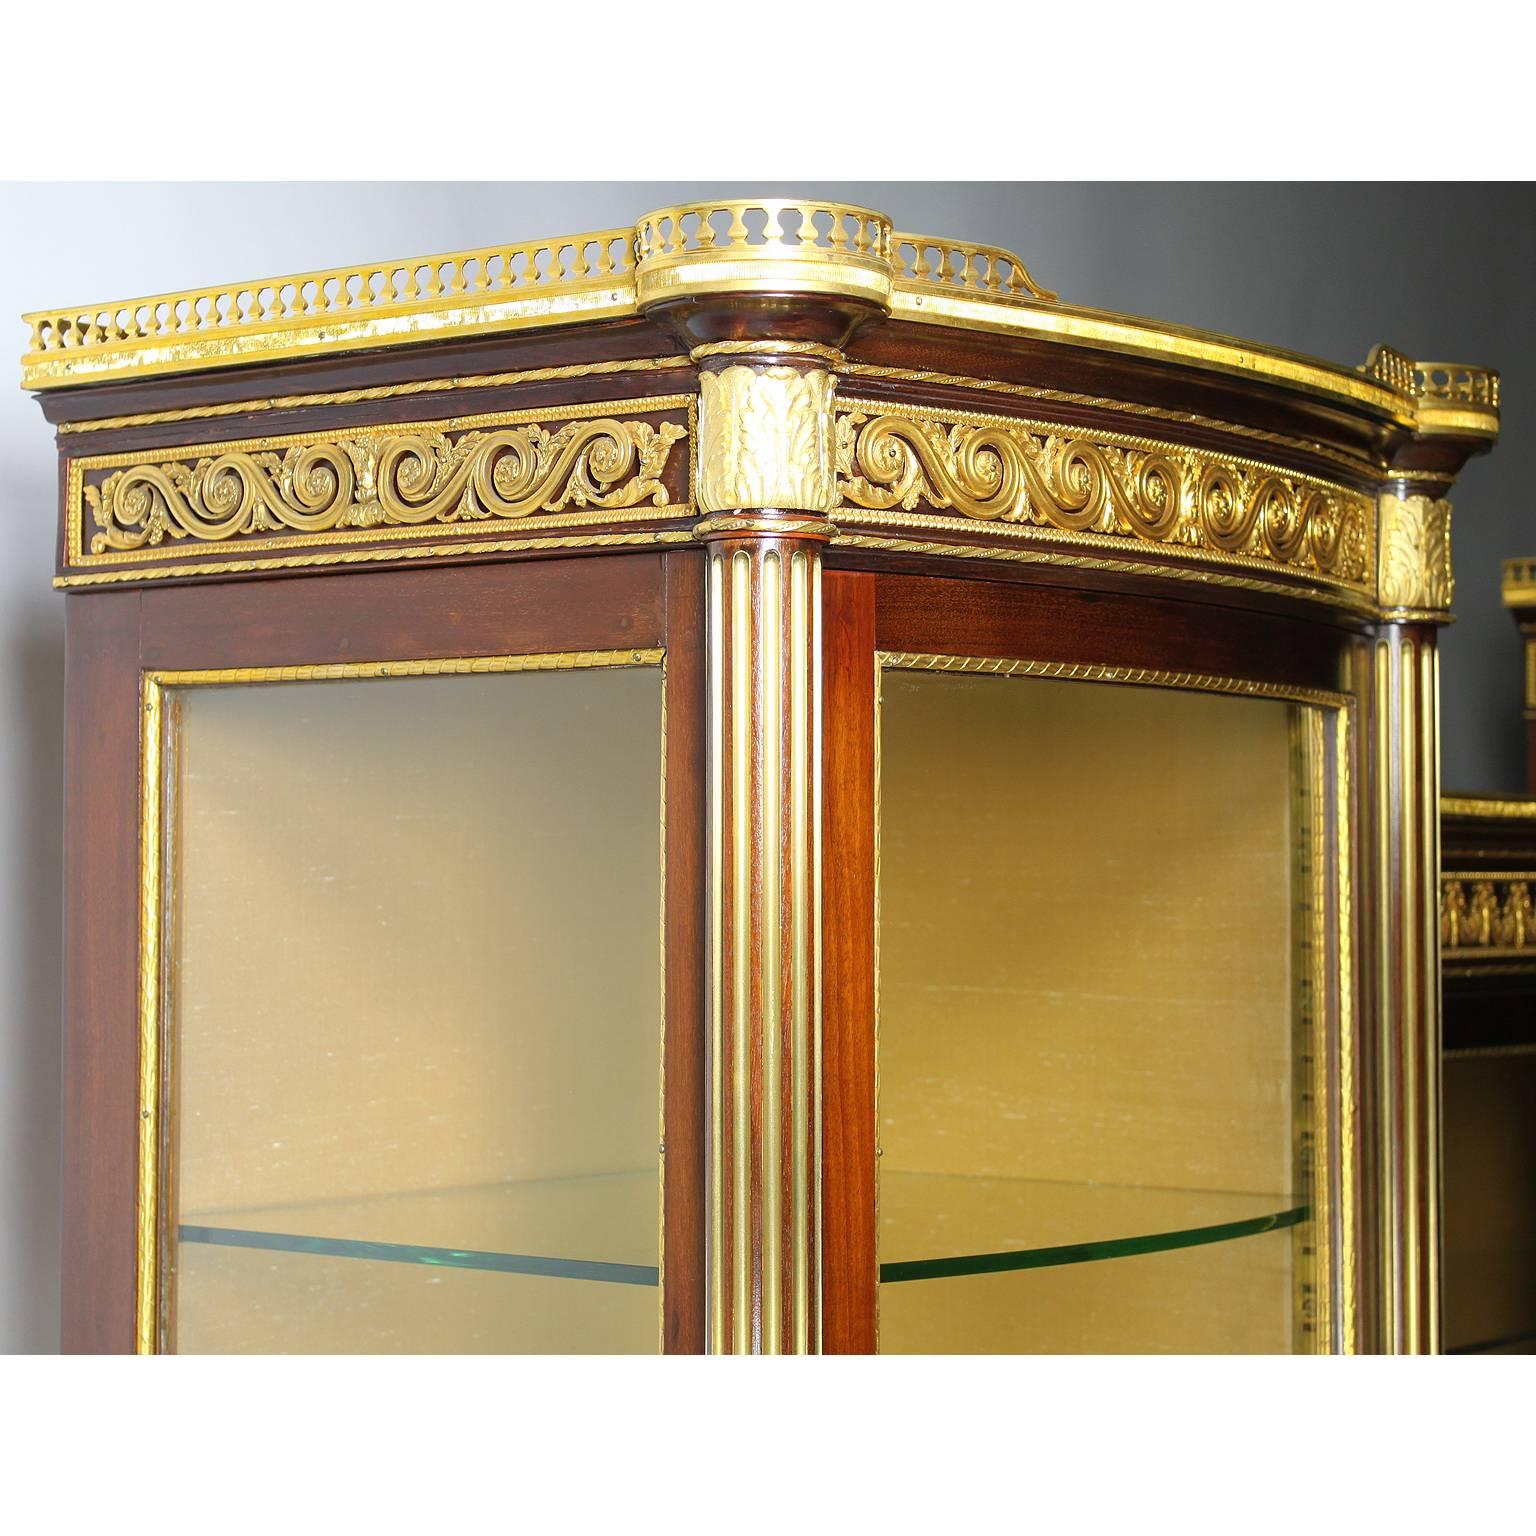 French 19th-20th Century Louis XVI Style Mahogany and Ormolu-Mounted Vitrine For Sale 1